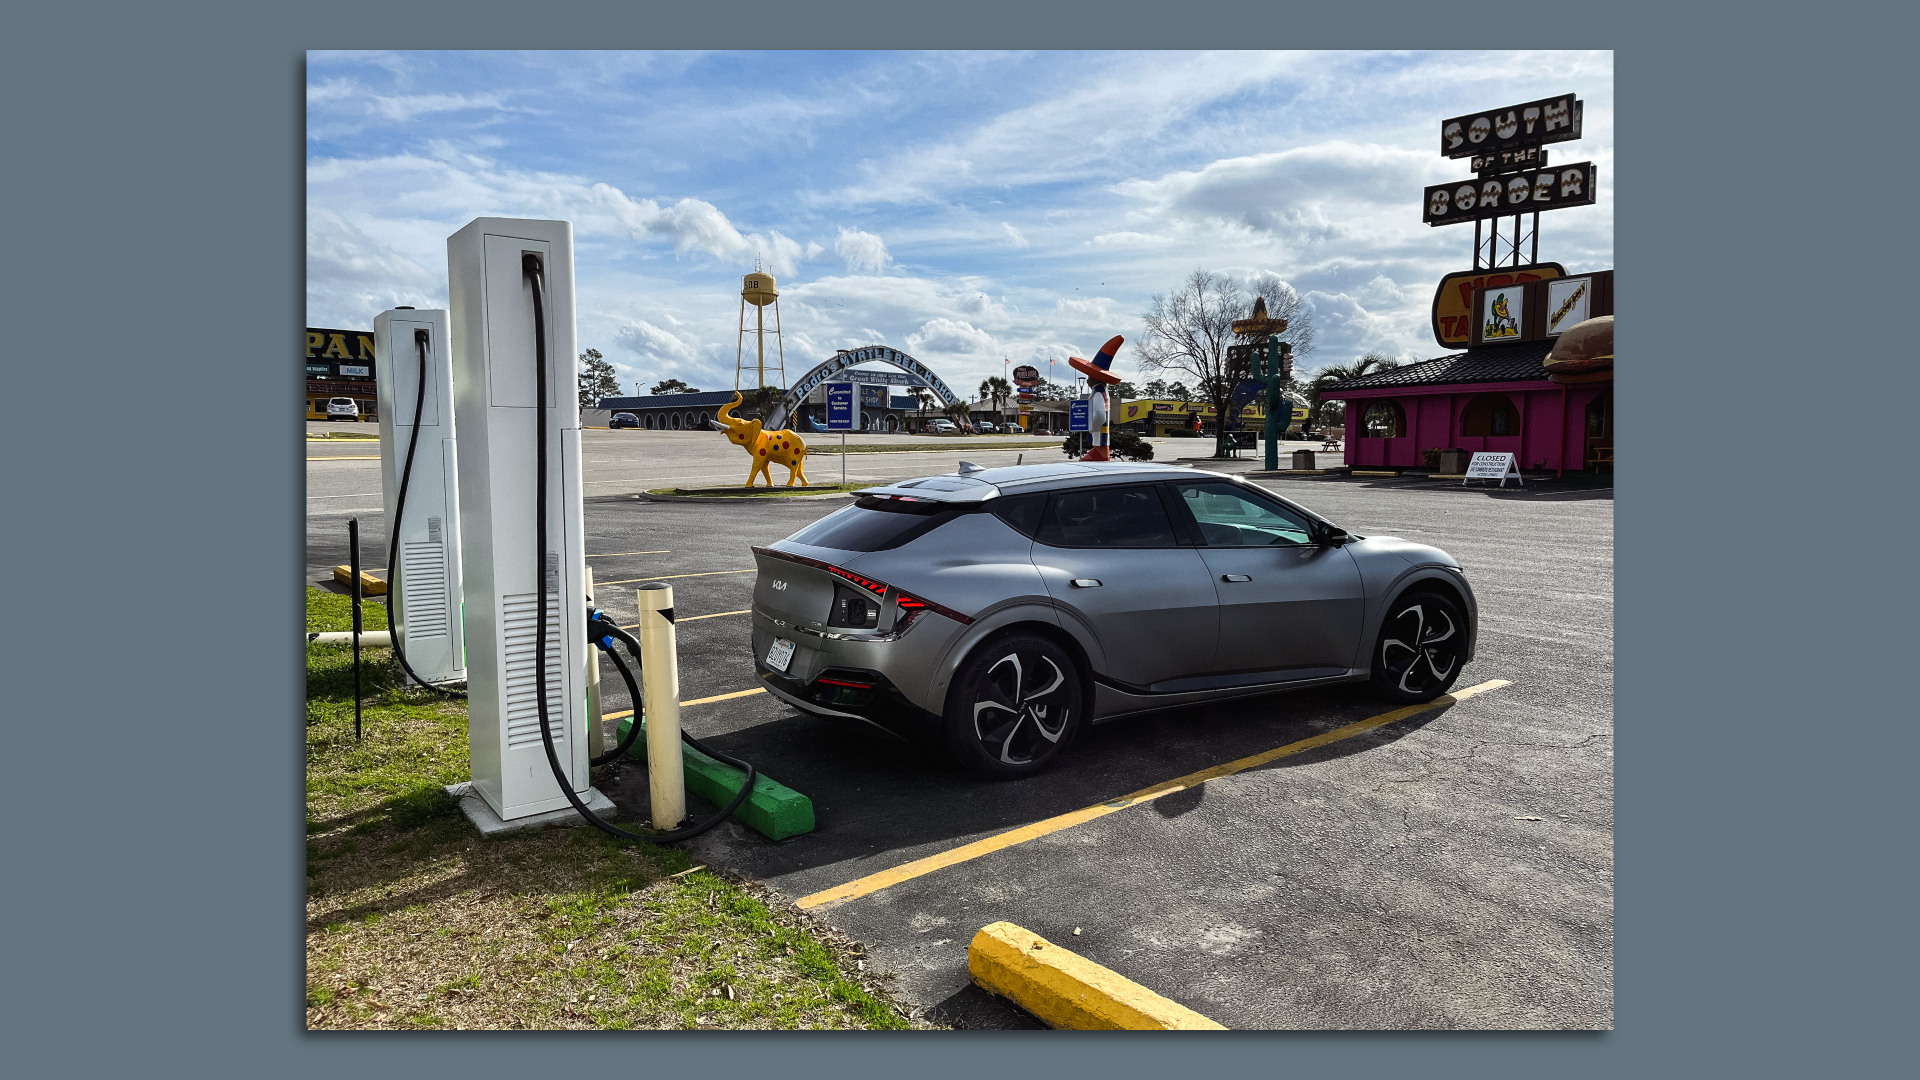 Joann and Bill recharged their Kia EV6 at a roadside attraction in South Carolina called South of the Border. 